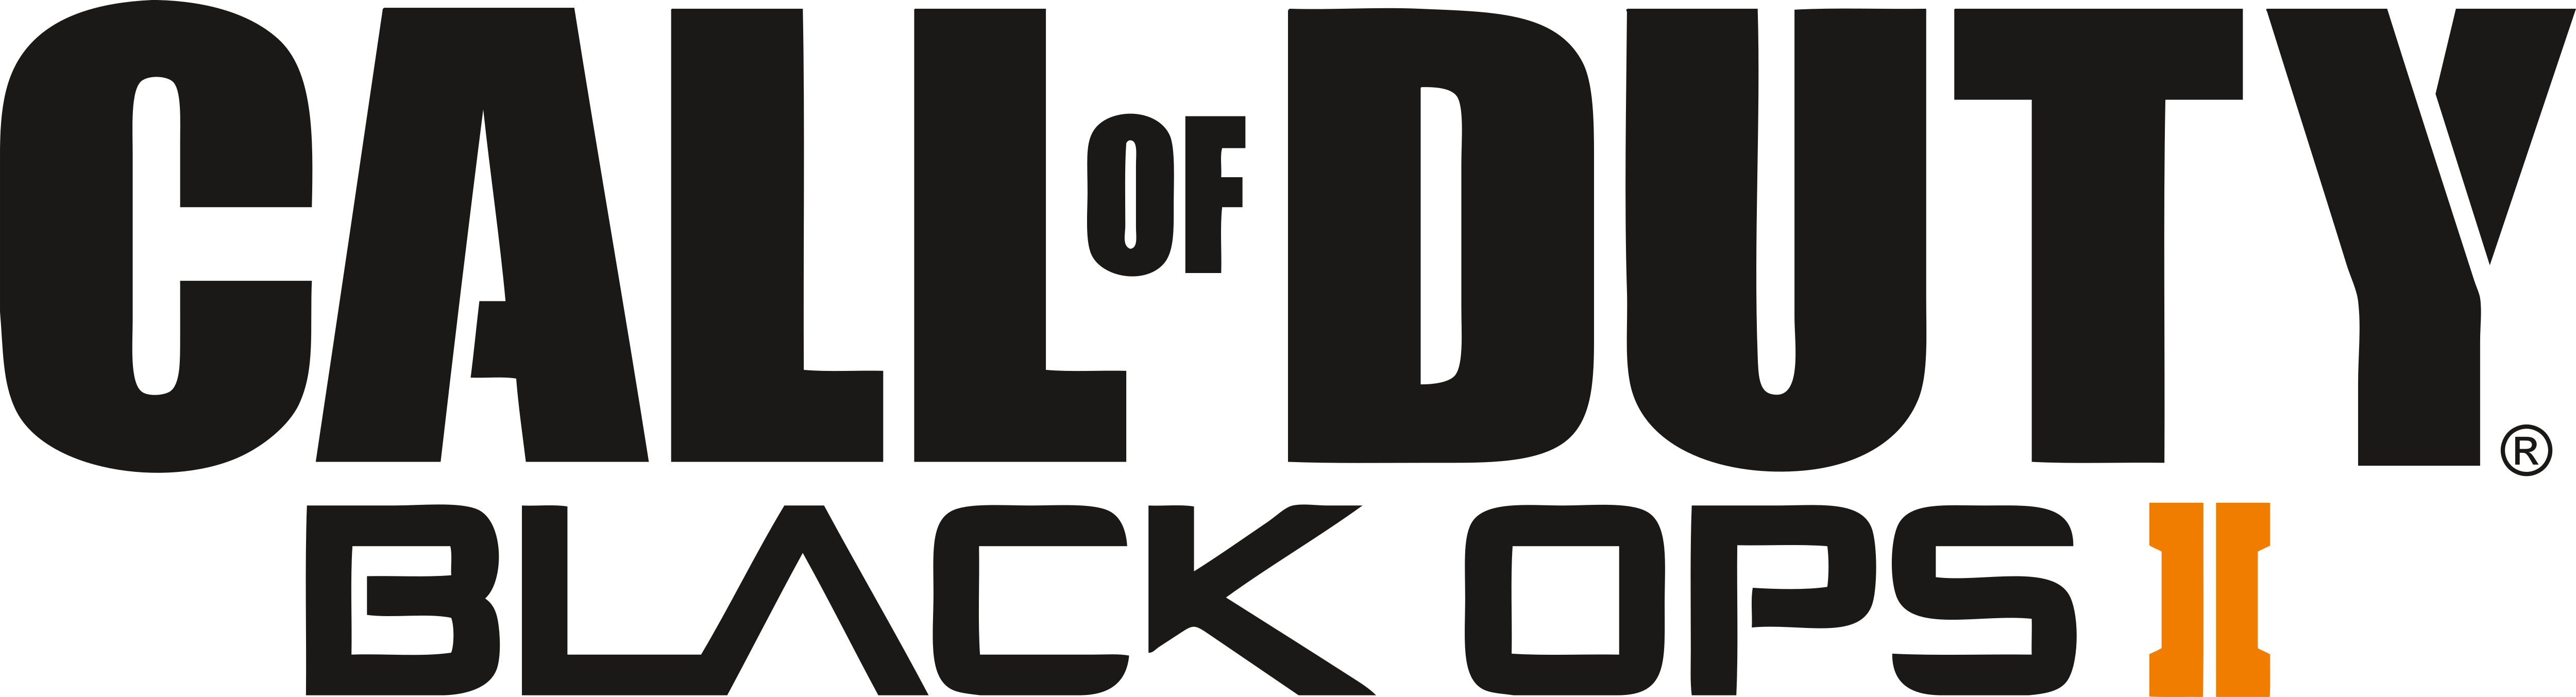 Call Of Duty Black Ops – Logos Download - Call Of Duty, Transparent background PNG HD thumbnail